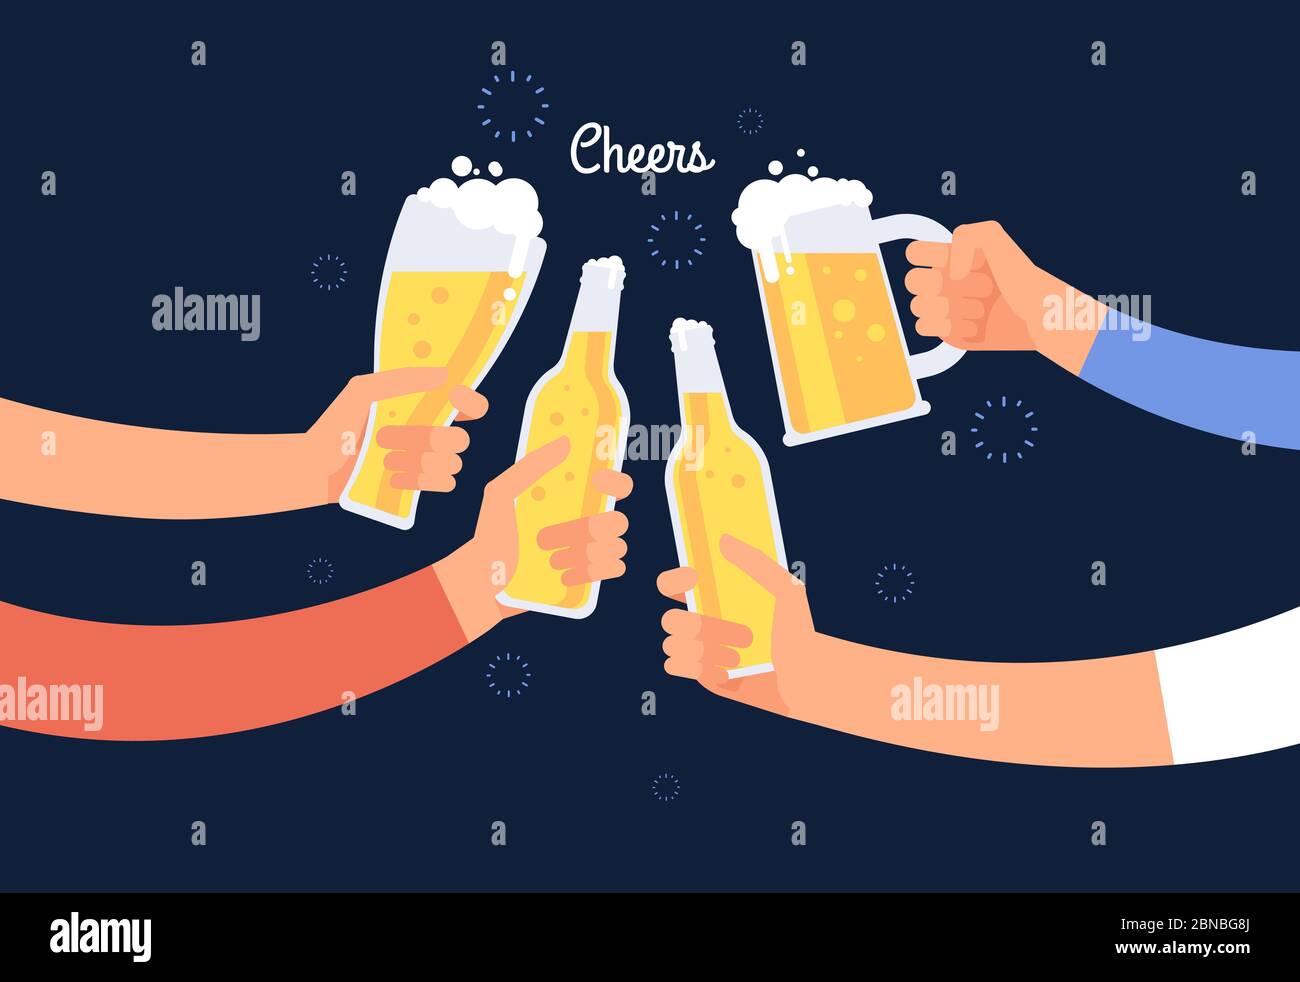 Cheering hands. Cheerful people clinking beer bottle and glasses. Happy drinking holiday vector background. Illustration of alcohol beverage bottle beer, cheers party in pub Stock Vector